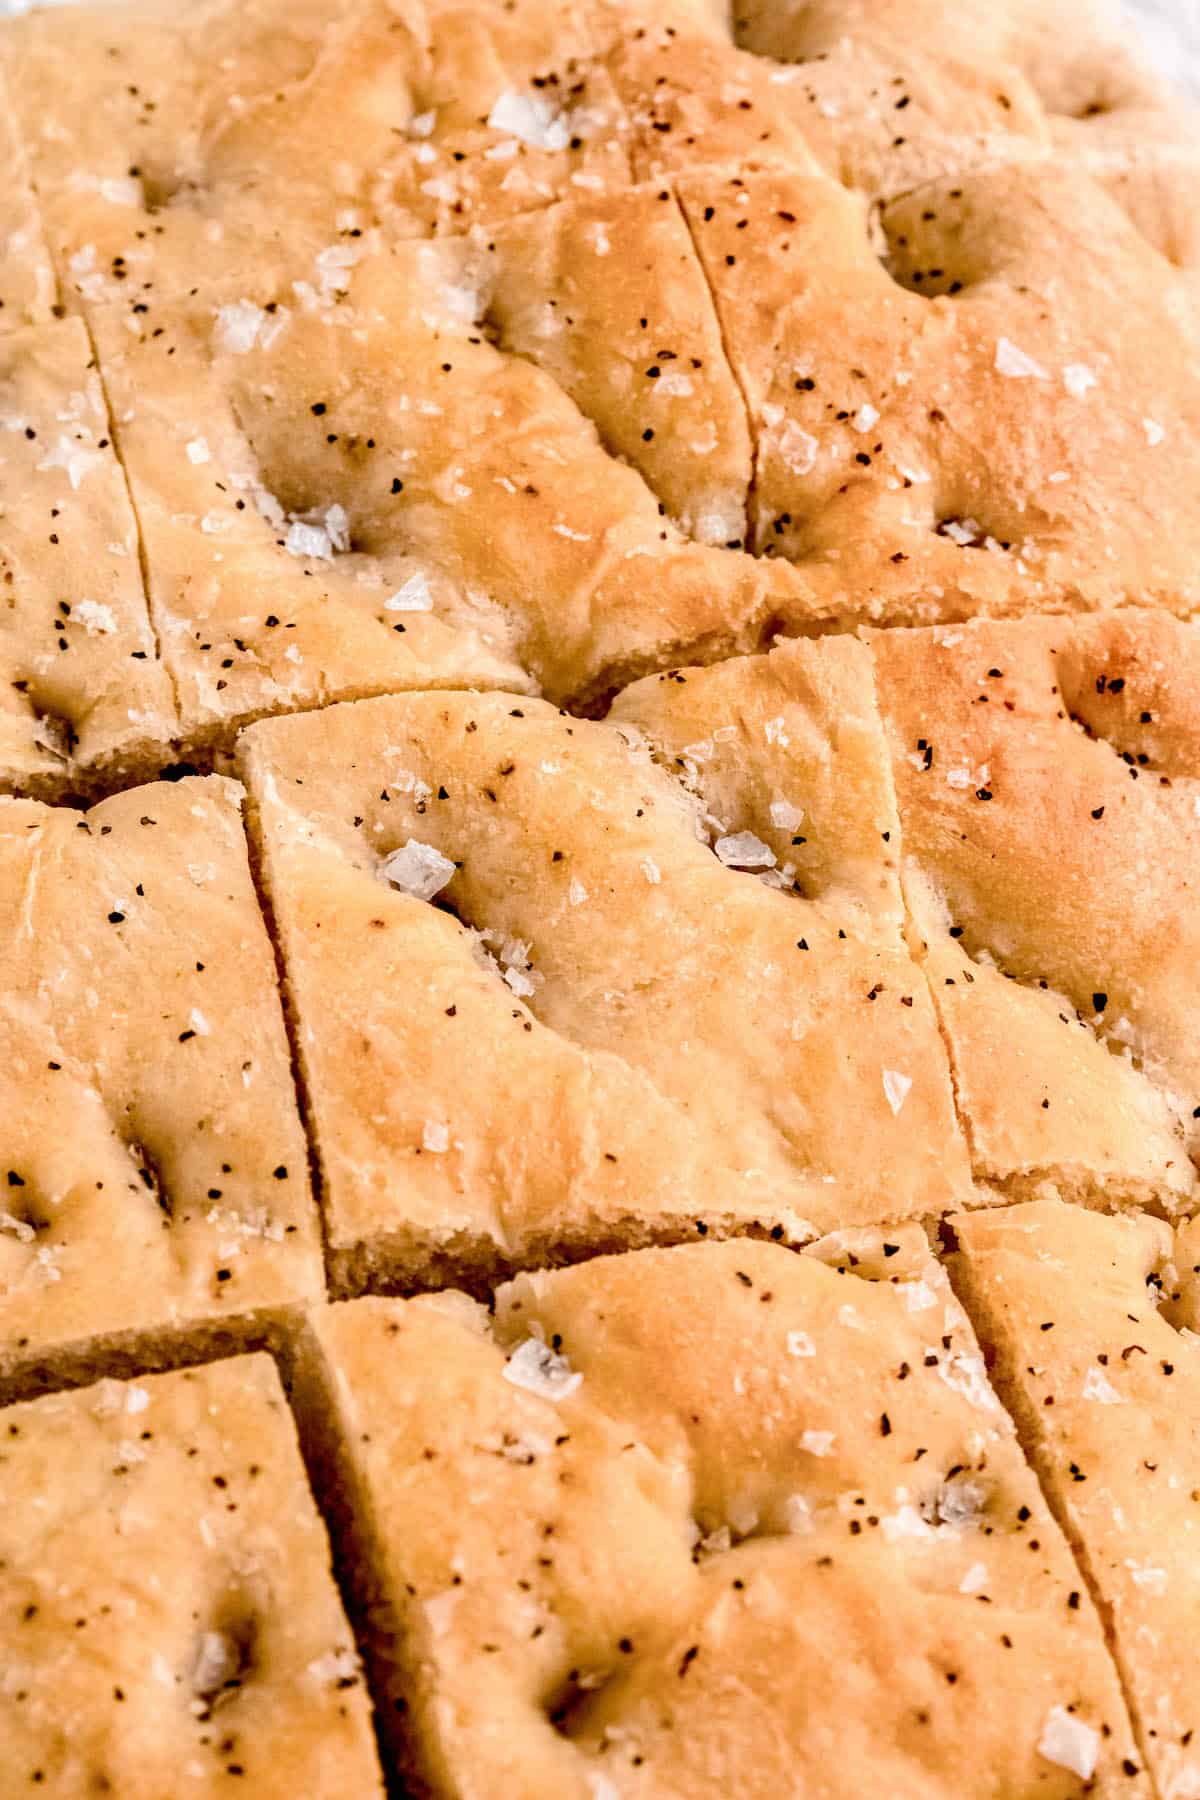 closeup shot of focaccia after slicing. you can clearly see flakes of maldon salt and coarse black peppercorn.